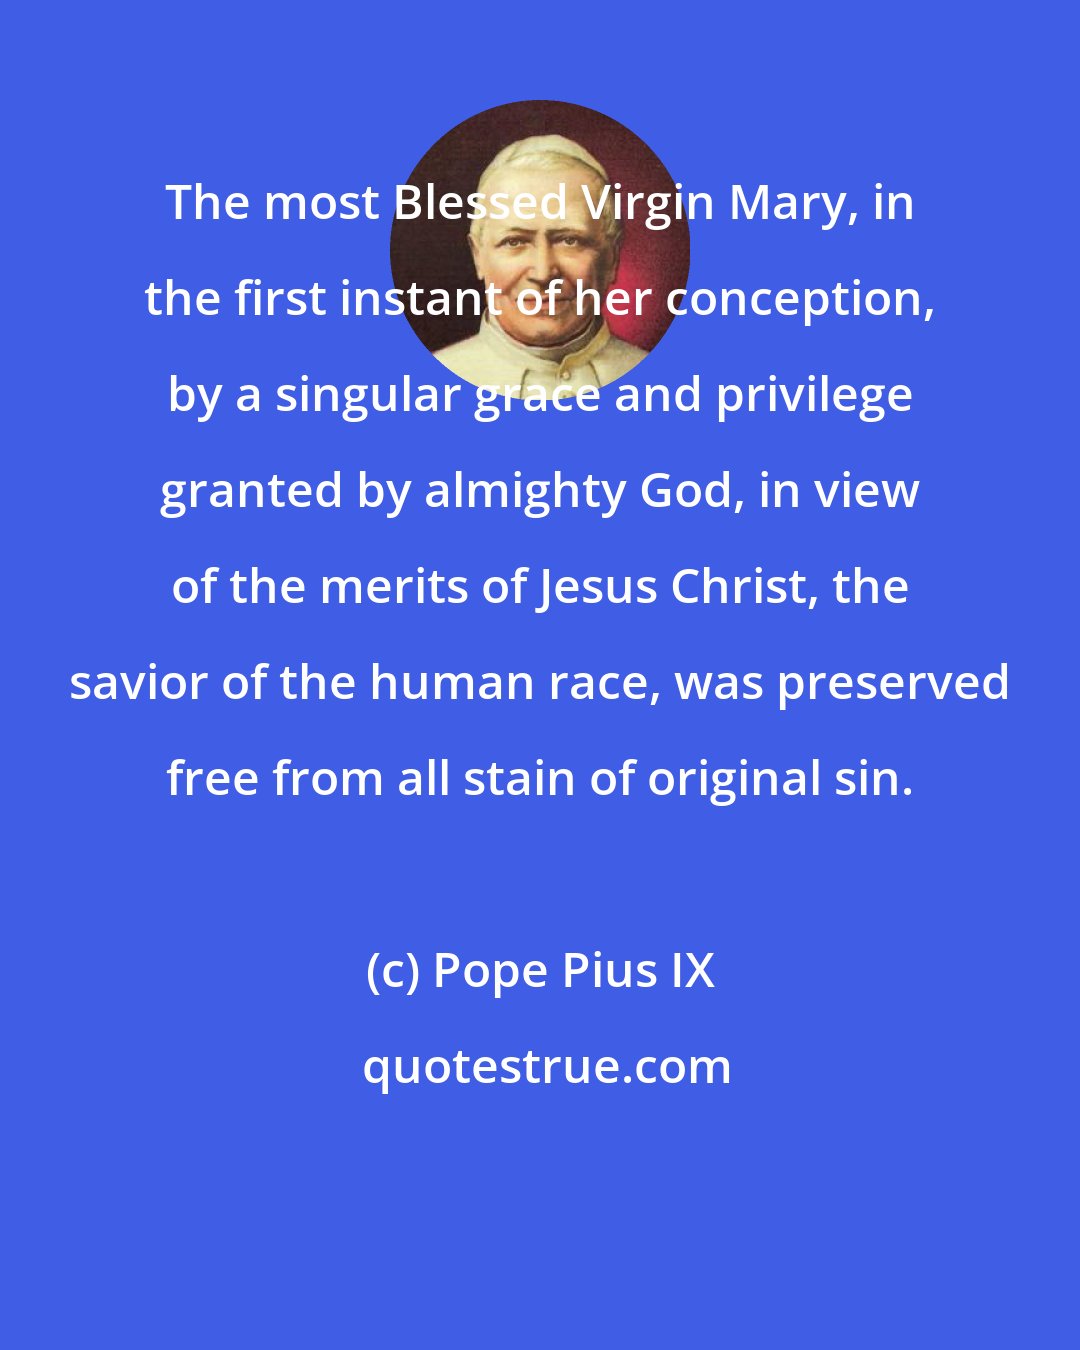 Pope Pius IX: The most Blessed Virgin Mary, in the first instant of her conception, by a singular grace and privilege granted by almighty God, in view of the merits of Jesus Christ, the savior of the human race, was preserved free from all stain of original sin.